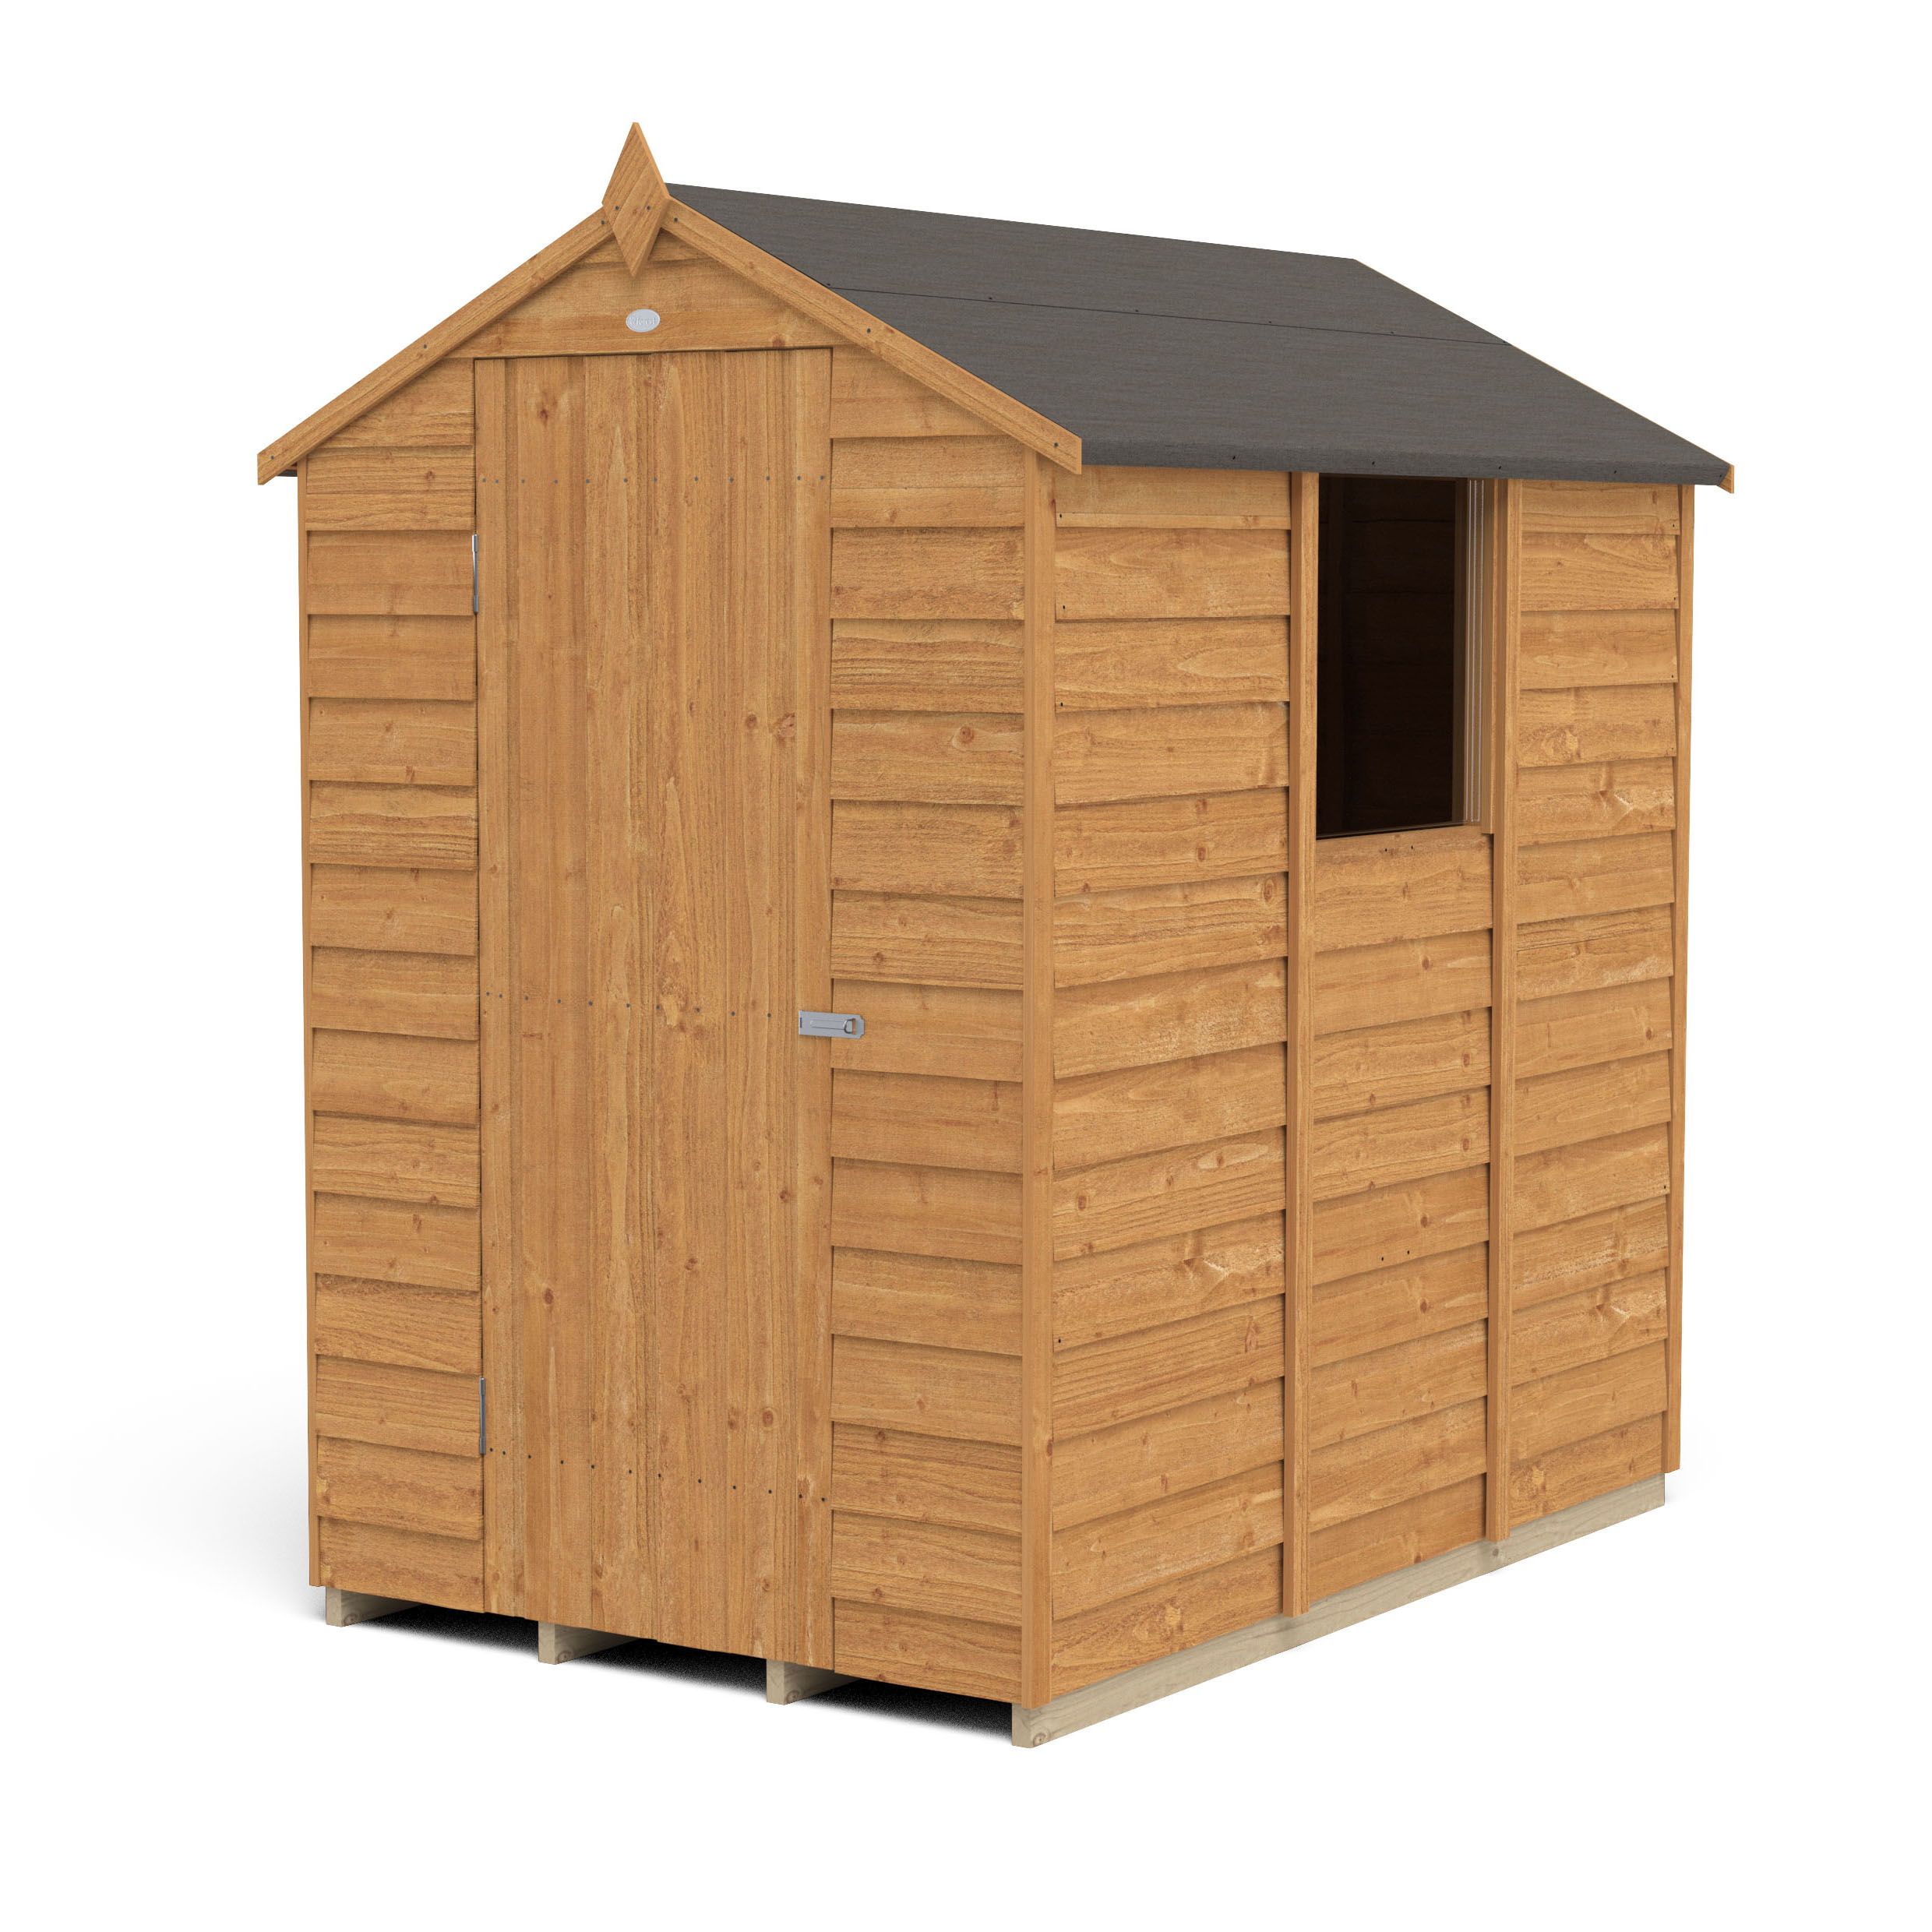 Forest Garden Overlap 6x4 ft Apex Wooden Dip treated Shed with floor & 1 window (Base included)